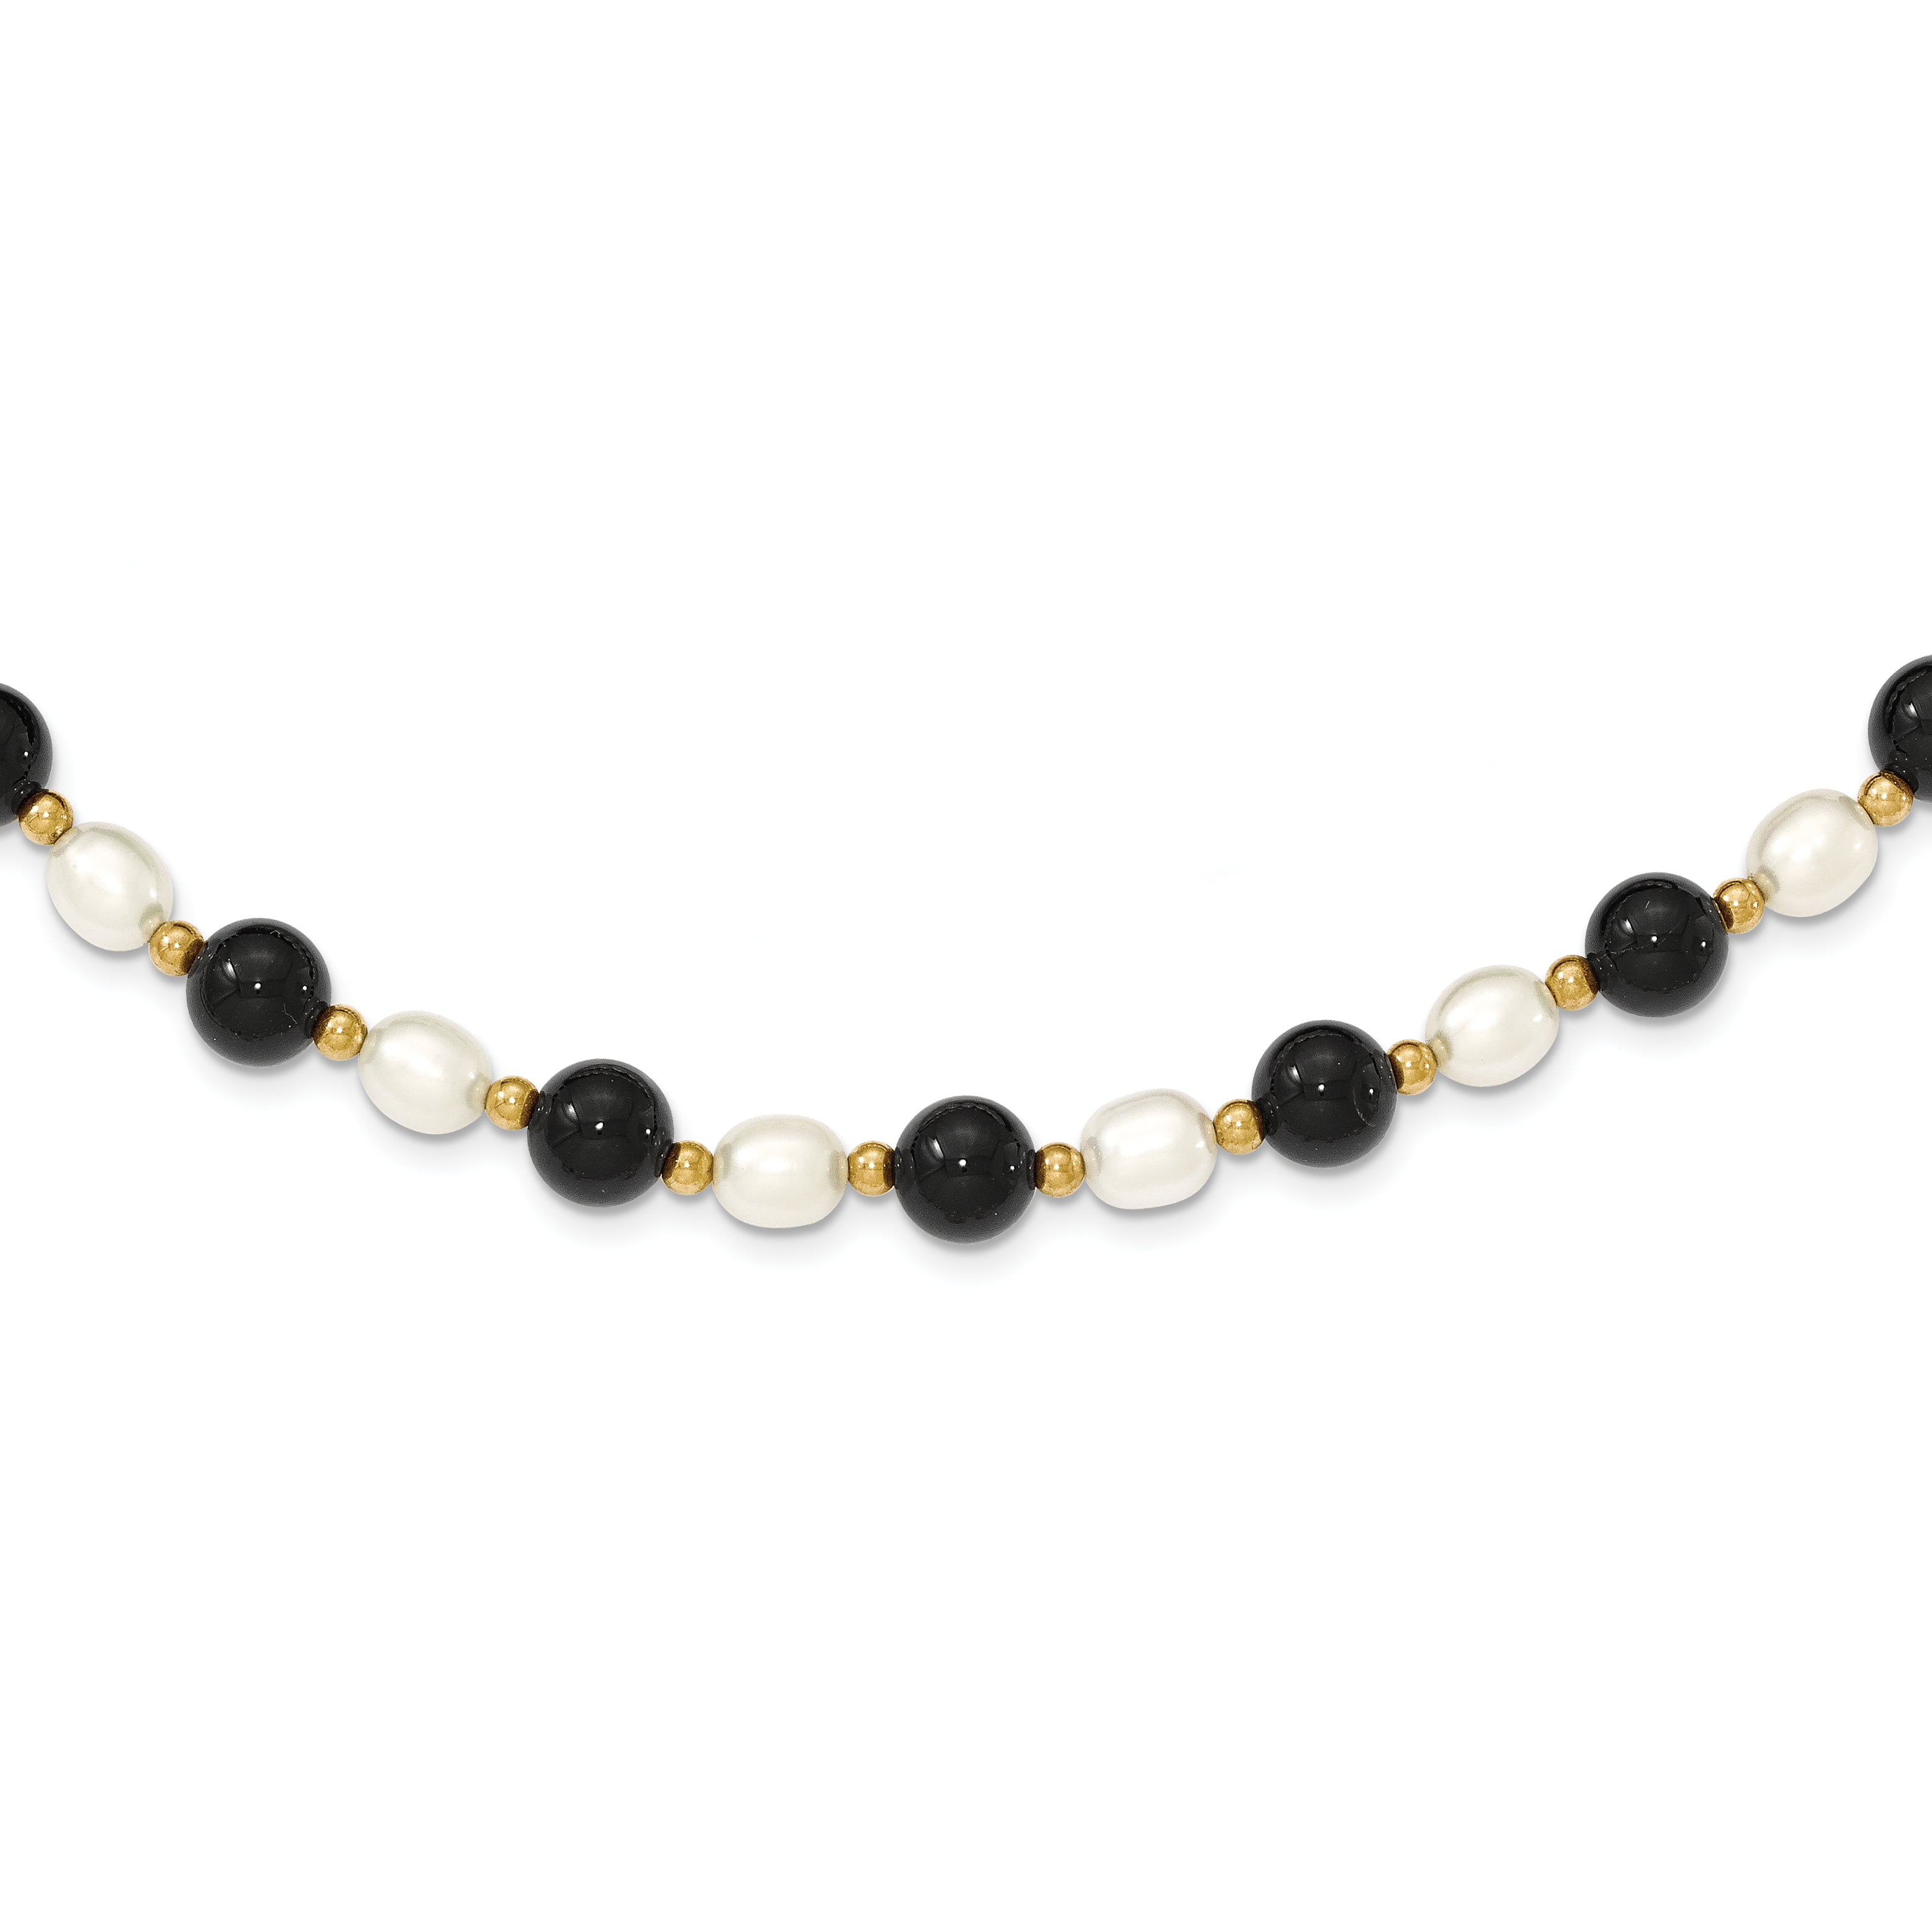 Onyx Bead and 11-12mm Cultured Baroque Pearl Necklace in 14kt Yellow Gold.  18